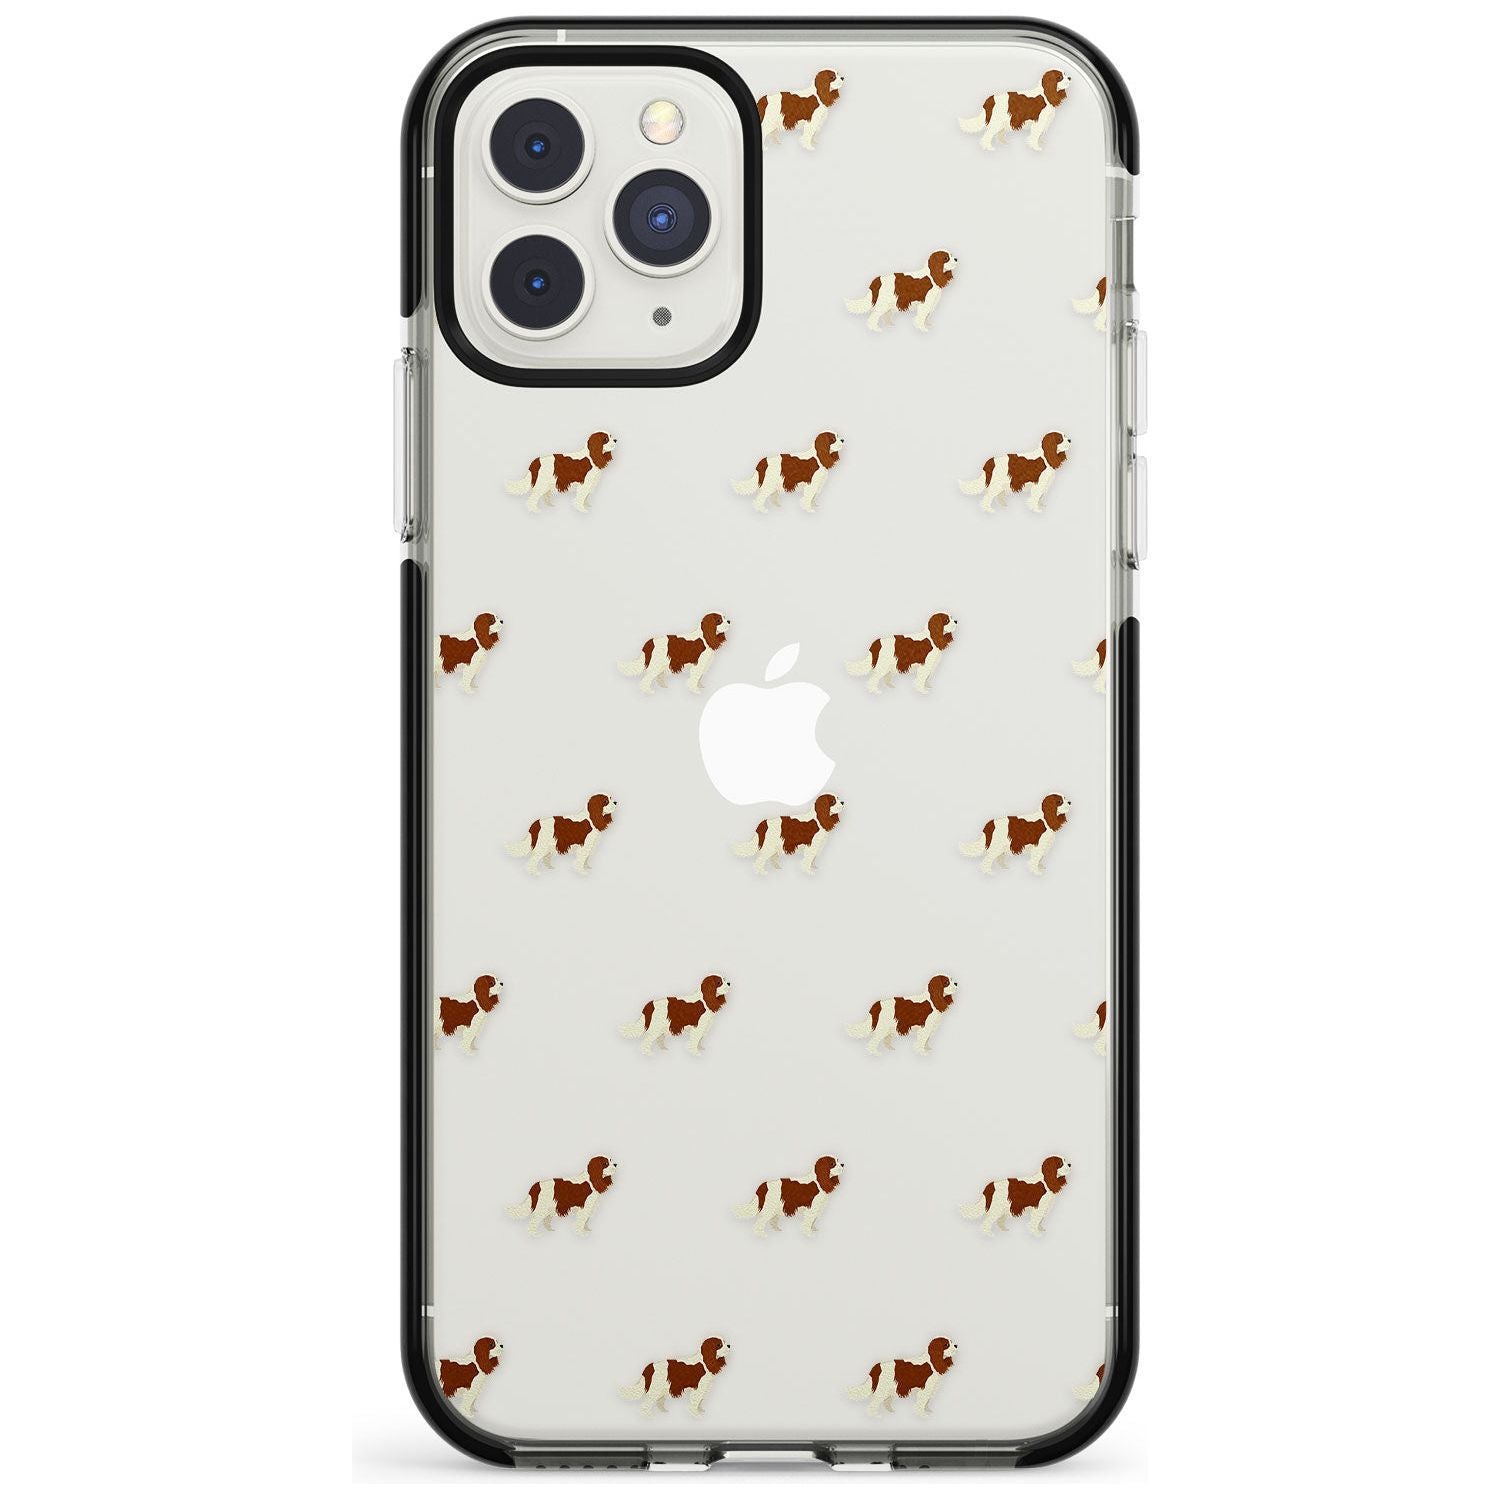 Cavalier King Charles Spaniel Pattern Clear Black Impact Phone Case for iPhone 11 Pro Max